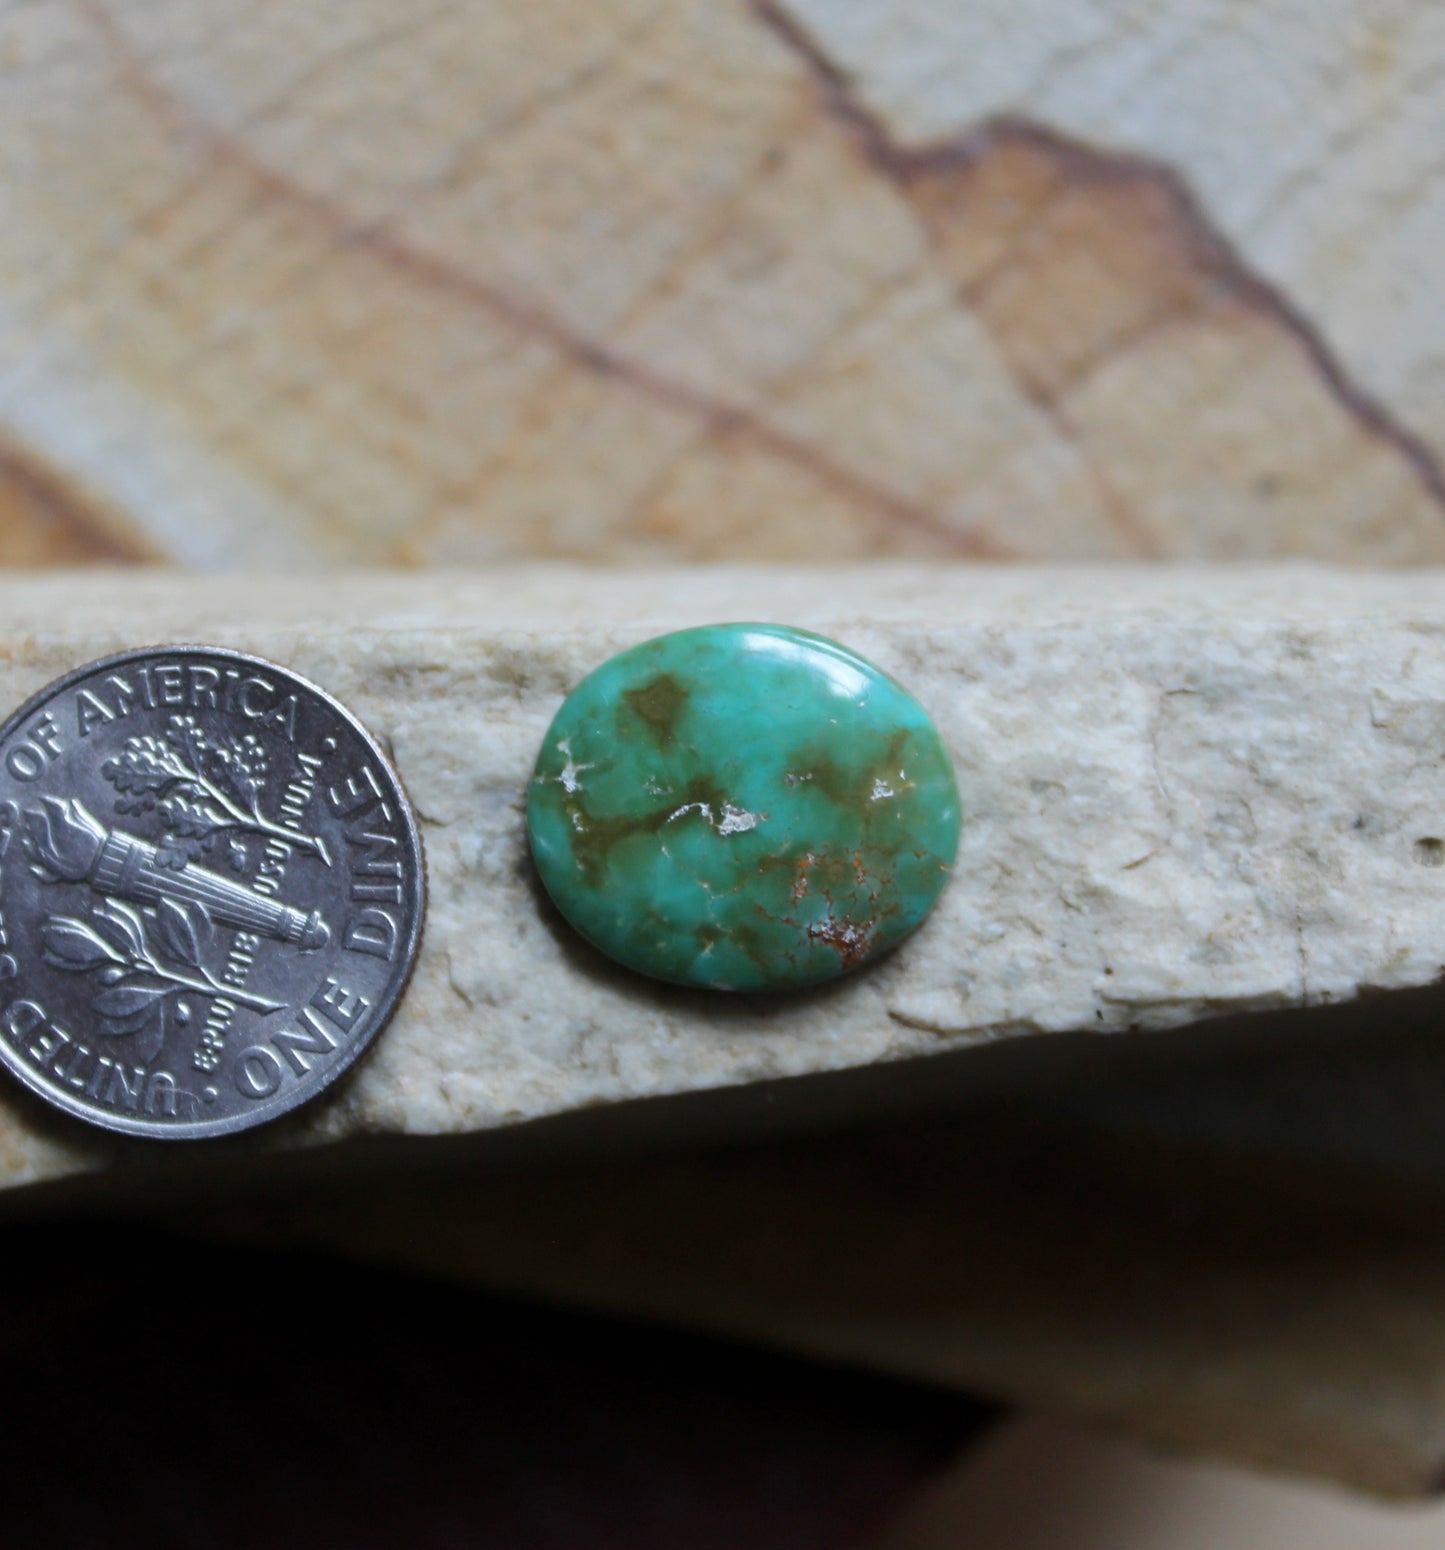 3 carat green Stone Mountain Turquoise cabochon oval